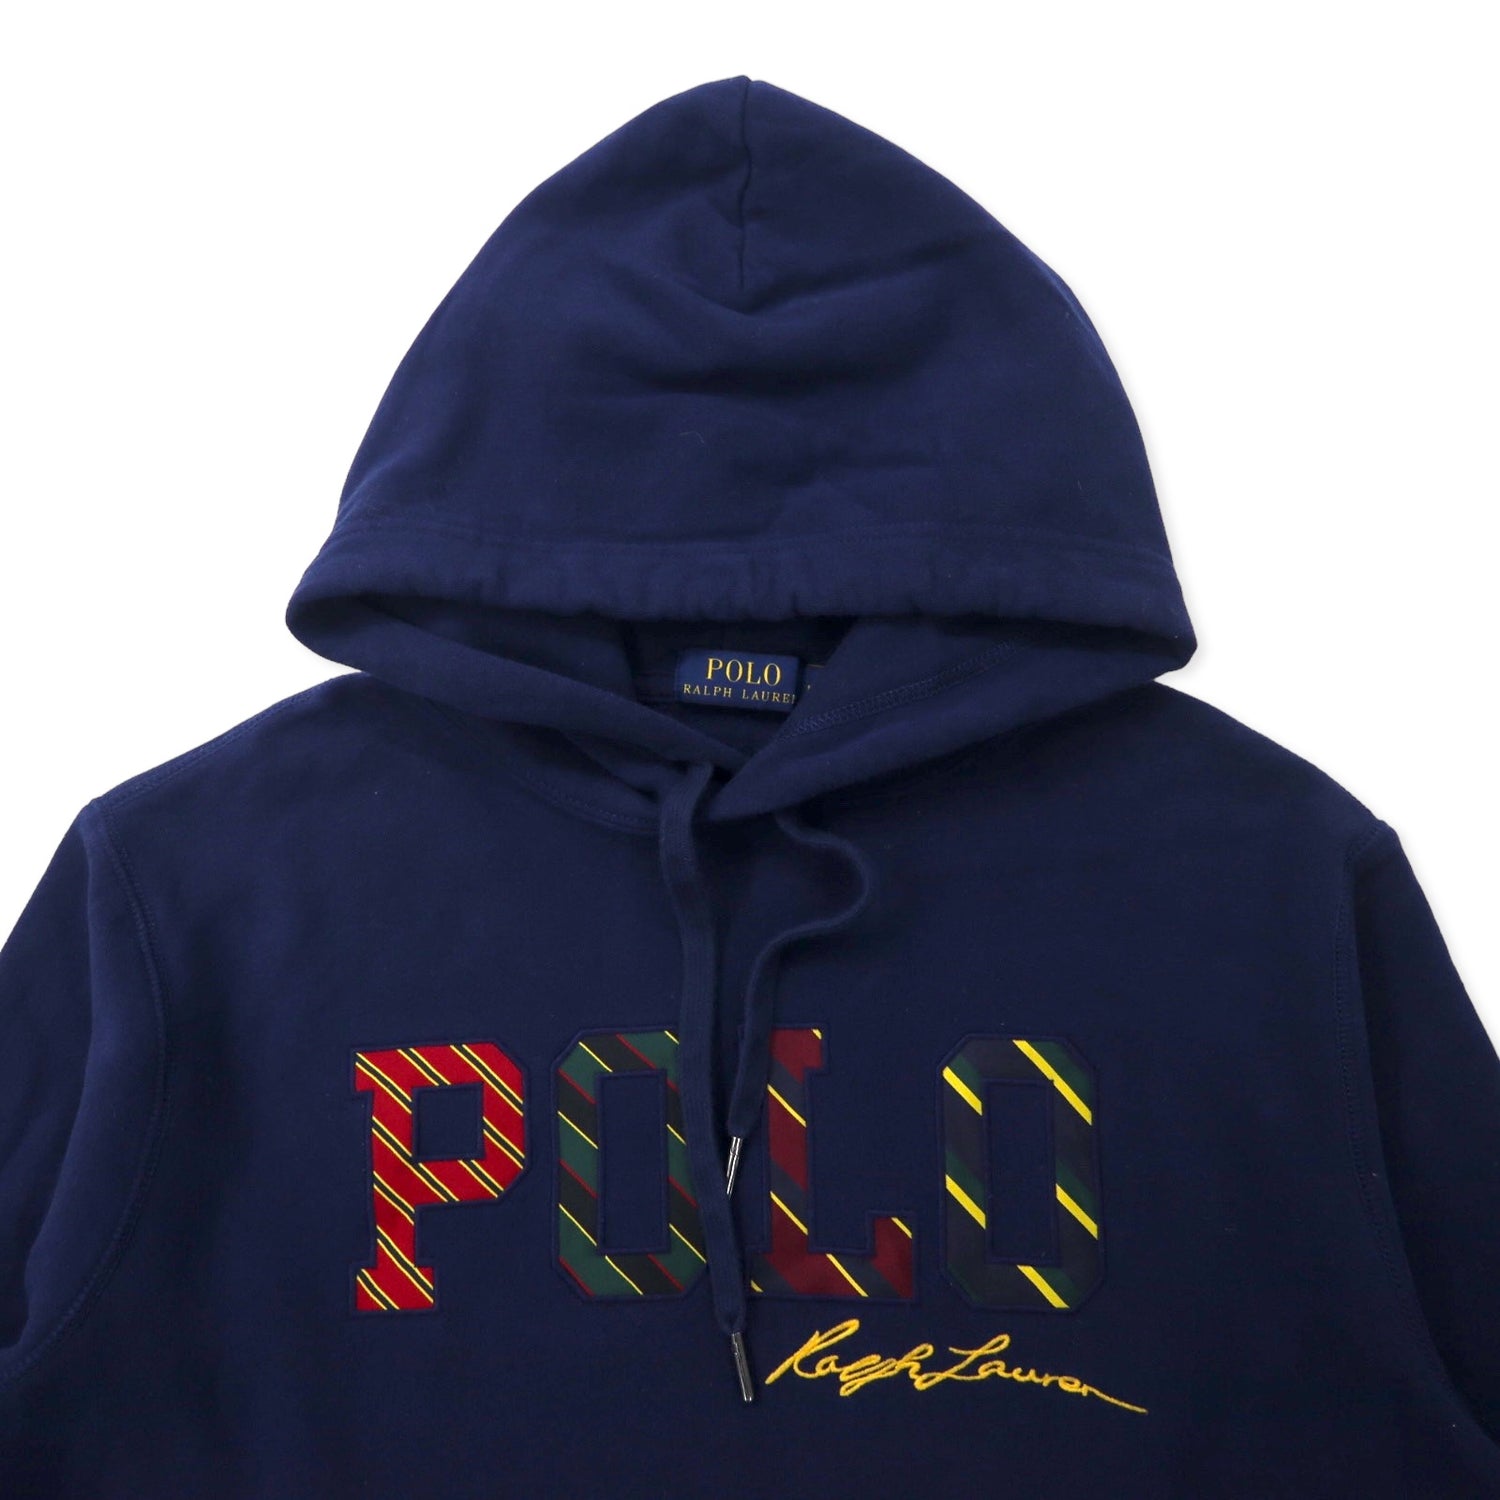 POLO RALPH LAUREN logo embroidery pullover hoodie m navy cotton